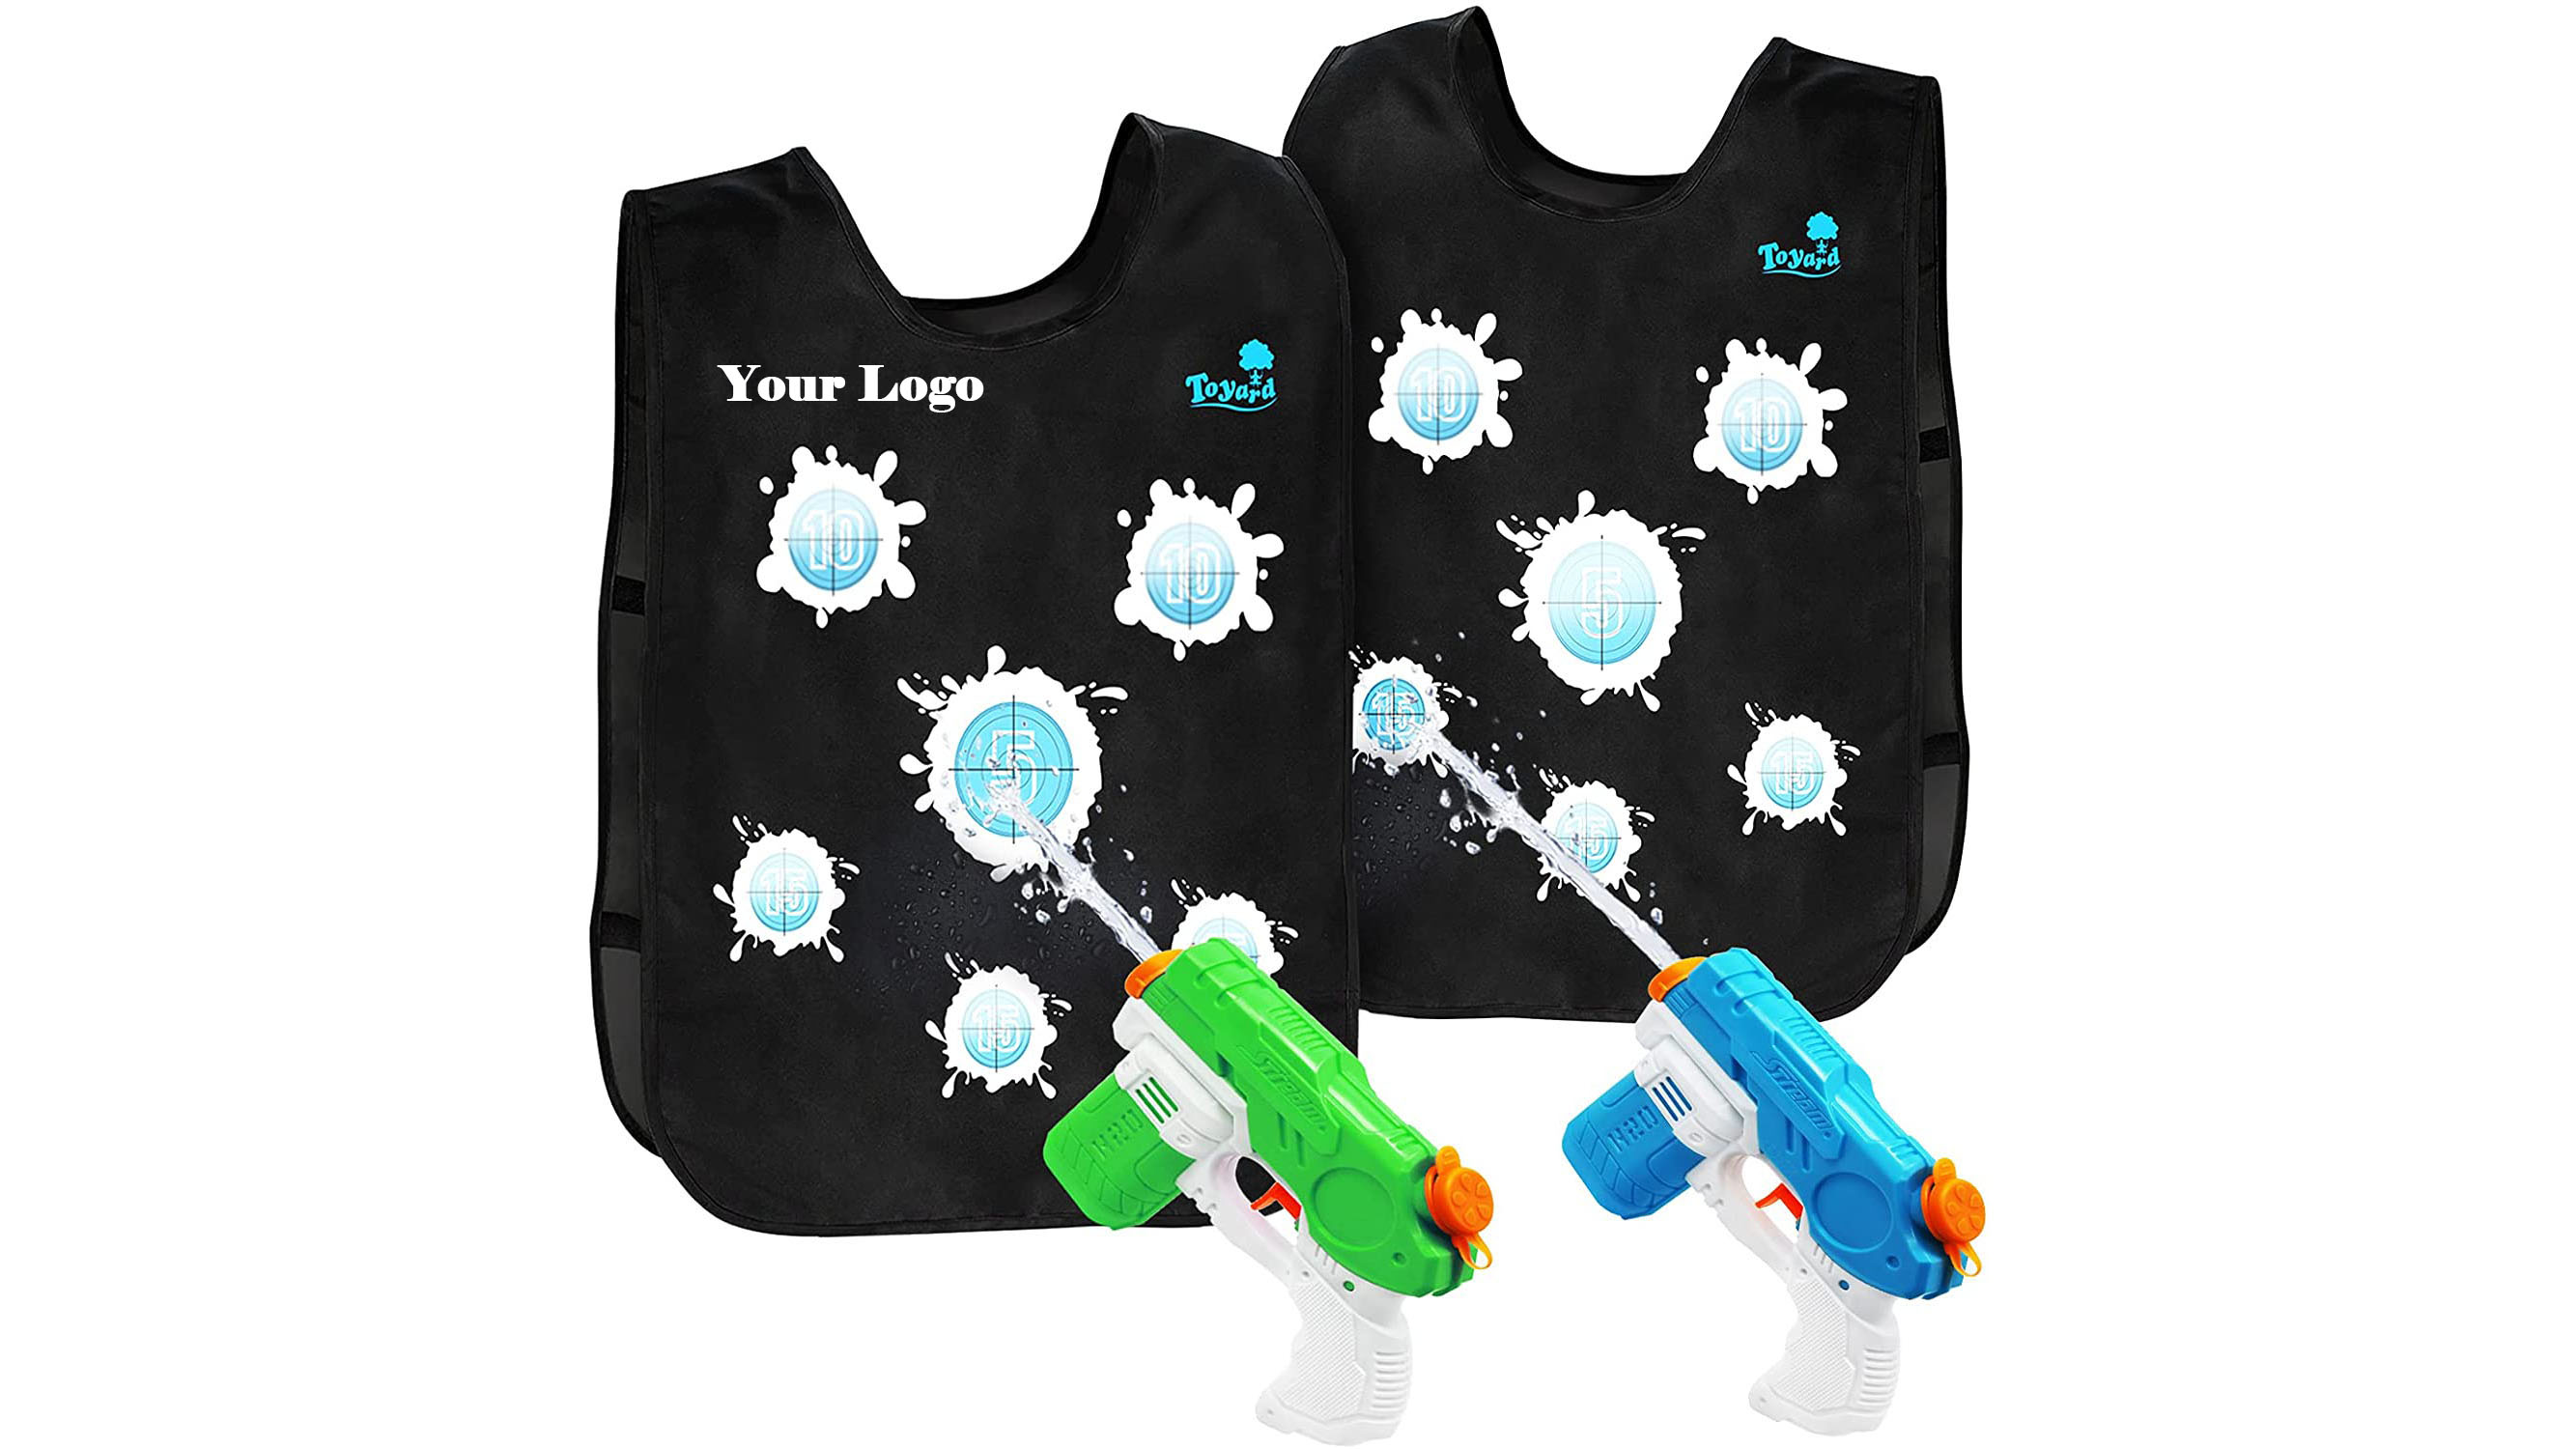 water games outdoor kid toys Water Guns vest with brand logo